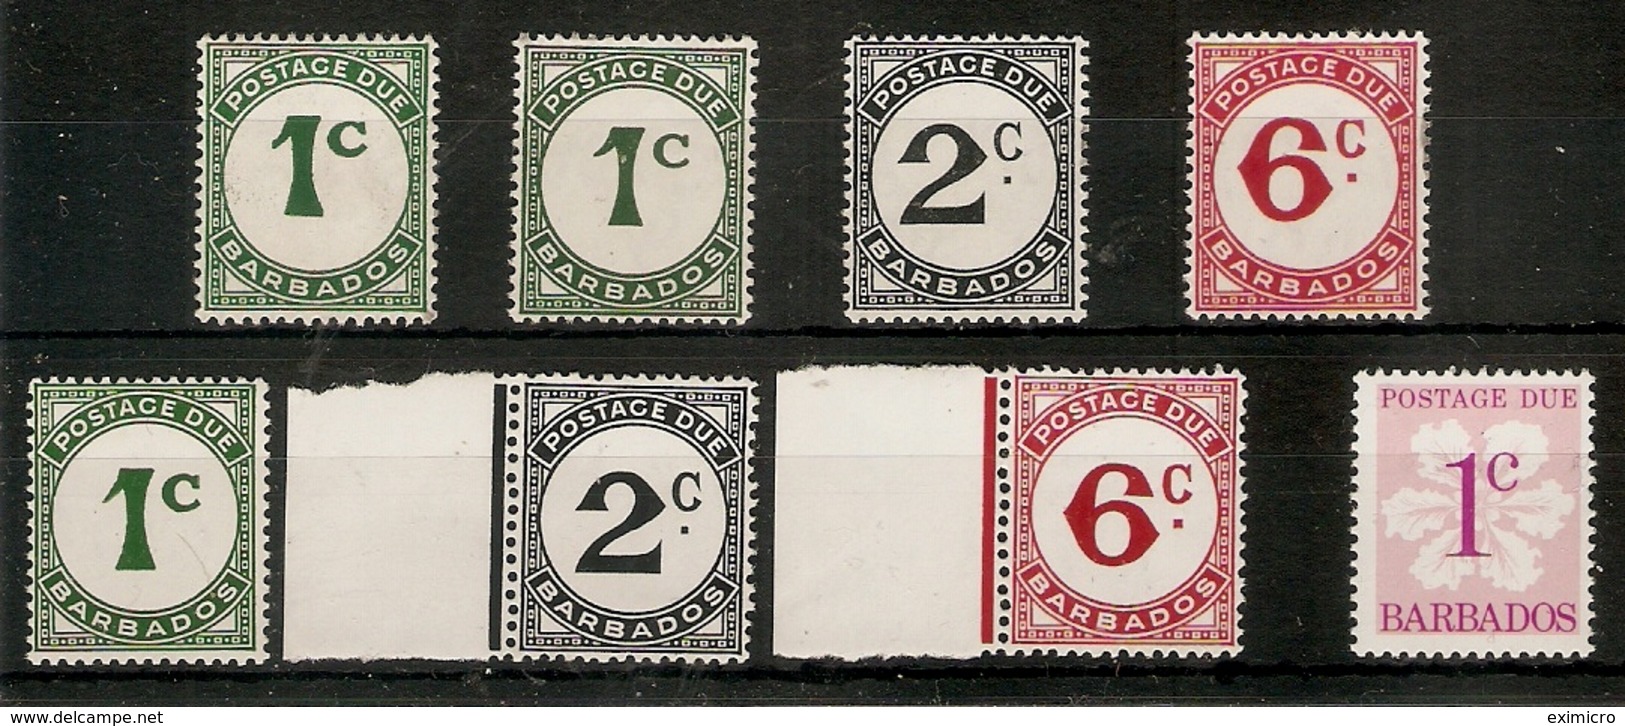 BARBADOS 1950 - 1976 POSTAGE DUES LIGHTLY  MOUNTED MINT/ UNMOUNTED MINT Cat £8.70 - Barbados (...-1966)